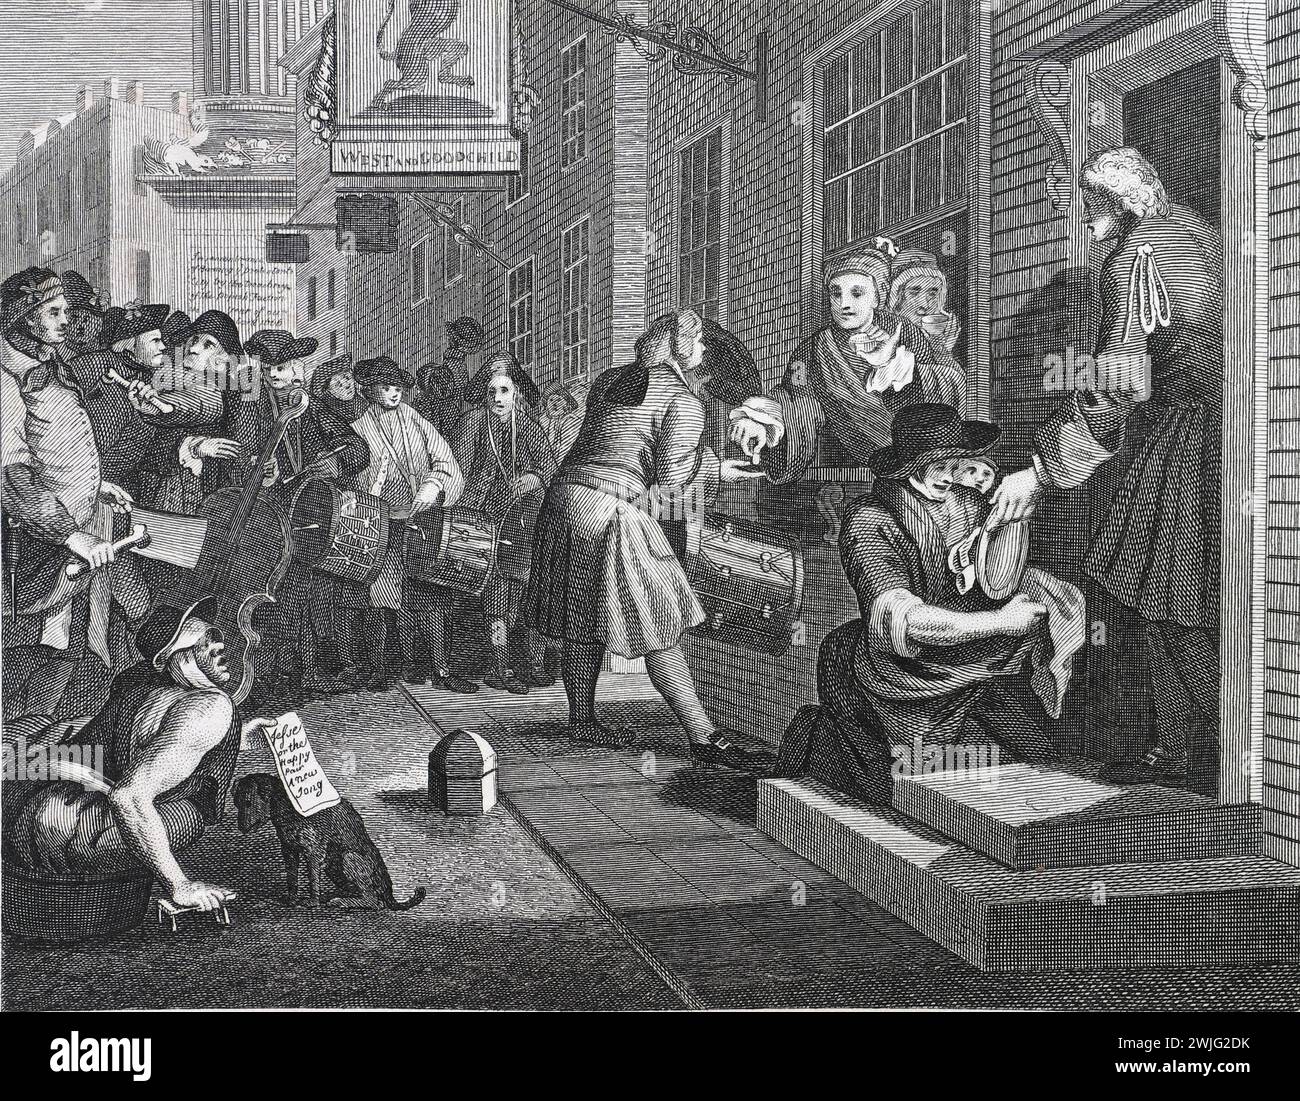 Black and White Illustration: 'The Industrious 'Prentice Out of his Time, and Married to his Master's Daughter'. Engraving after William Hogarth (1697 - 1764)  from his series, 'Industry and Idleness'. His earlier series of painted works, 'The Harlot's Progress' and 'Marriage à-la-mode' which were subsequently released as engravings, 'Industry and Idleness' was engraved from the outset. Hogarth's aim in this series was to illustrate the possible rewards for working  hard, and the pitfalls of not doing so, a message predominantly aimed at working children.  This reproduction was by Thomas Cook. Stock Photo